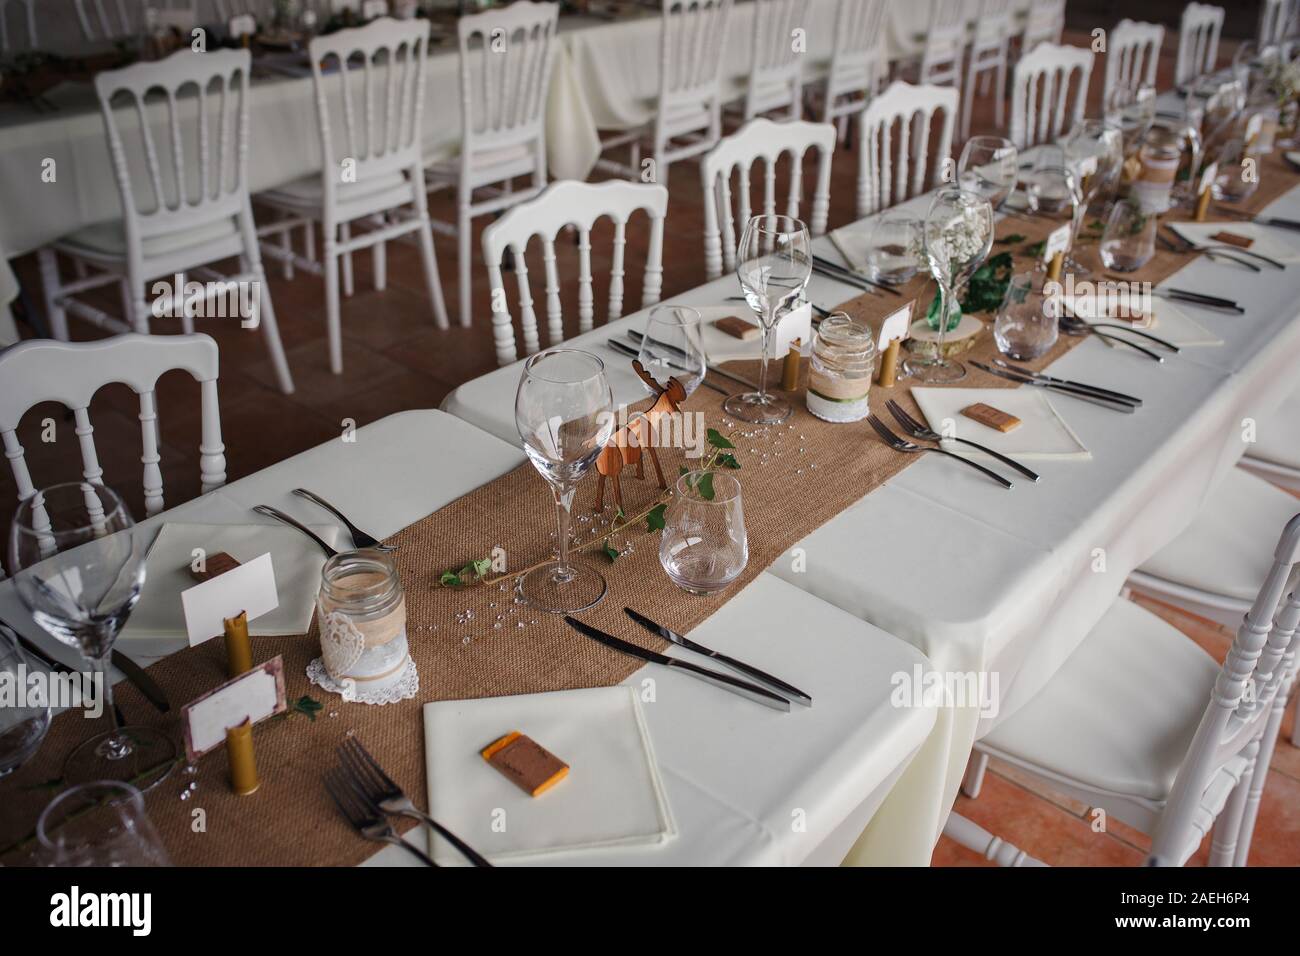 Outdoor Catering Dinner At The Wedding With Homemade Garnishes Decoration.  Rustic And Boho Style Decor, Natural Materials, Figures Of Deer, Green And  Stock Photo - Alamy